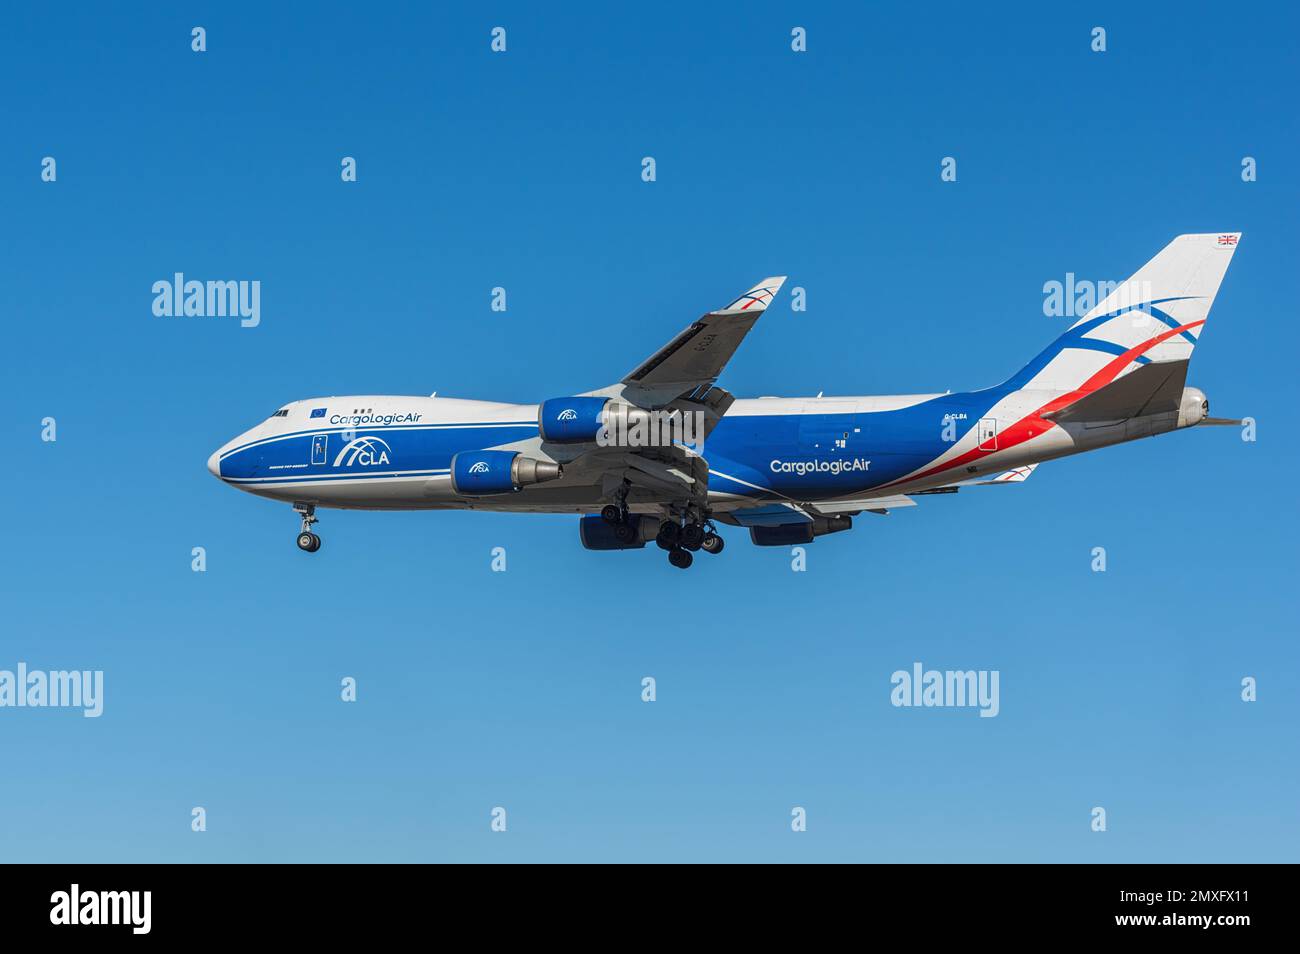 Los Angeles, California, United States: Cargologicair Boeing 747-428ERF with registration G-CLBA shown approaching LAX for landing. Stock Photo